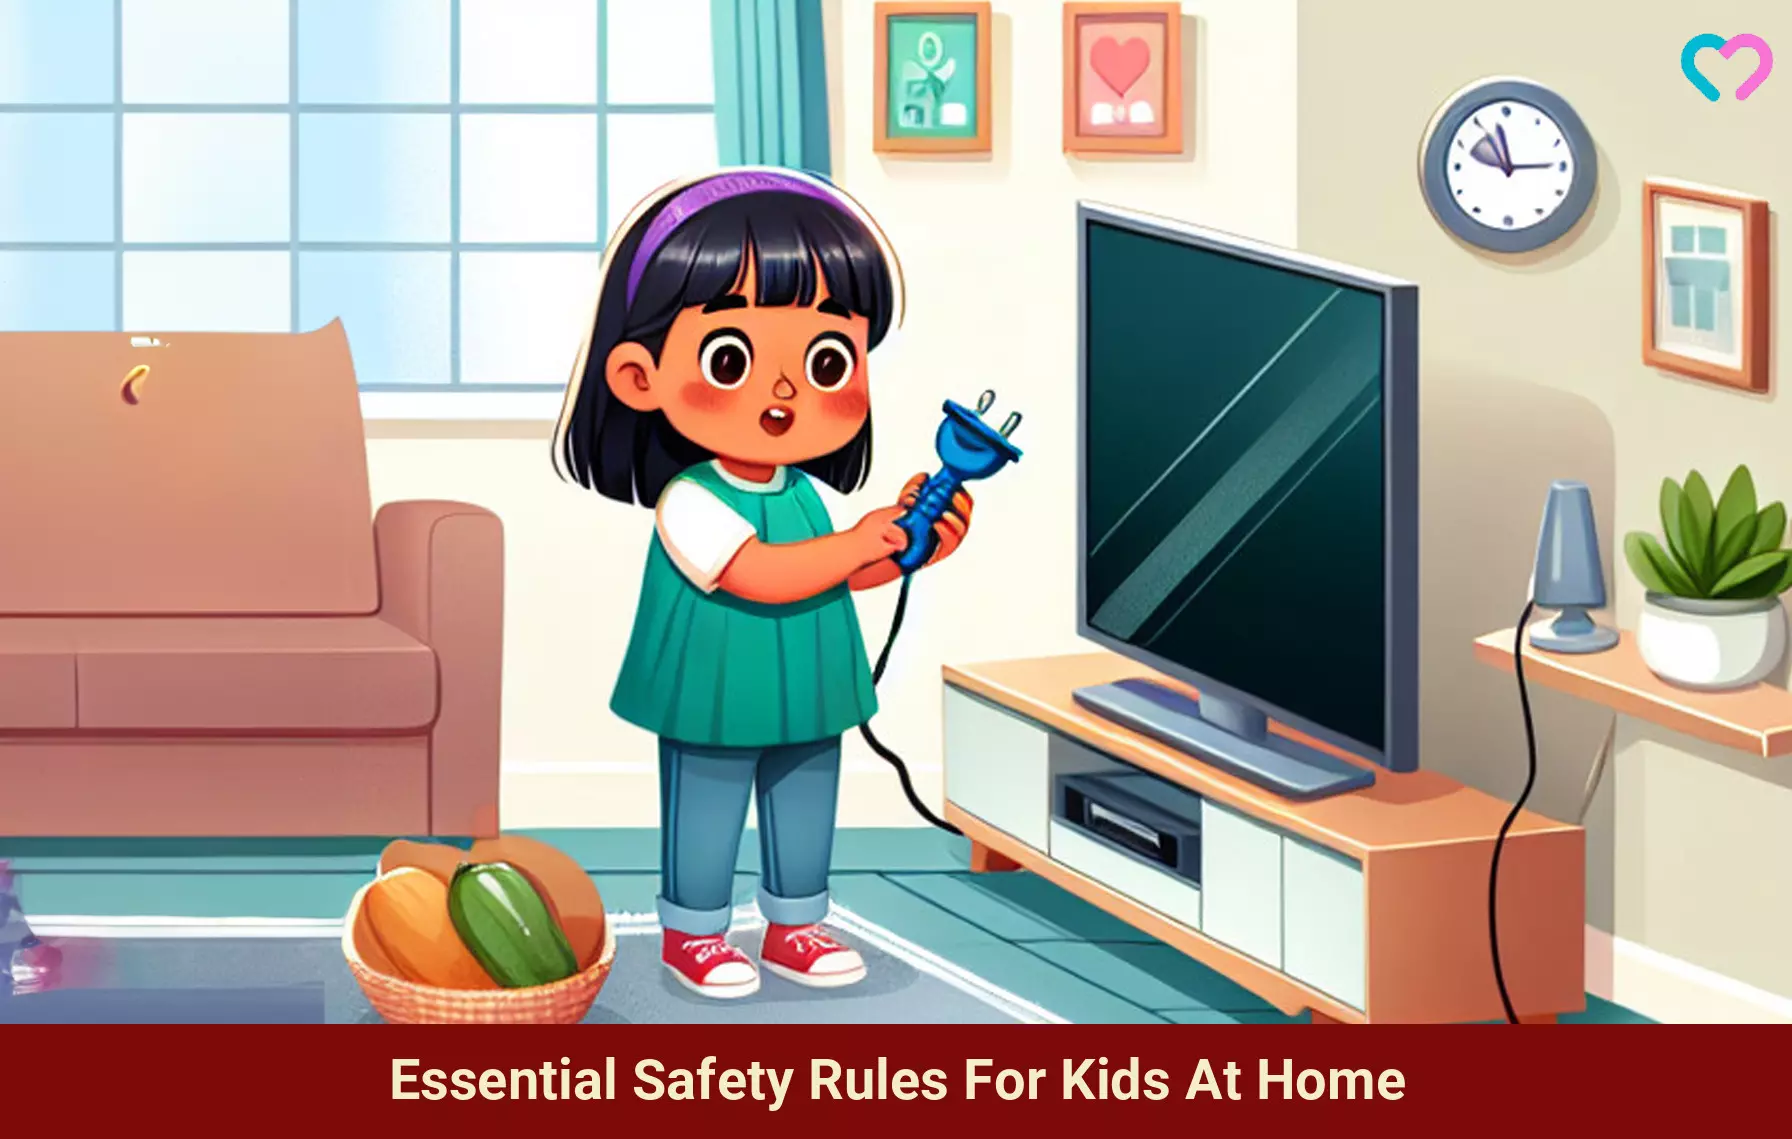 safety rules at home for kids_illustration